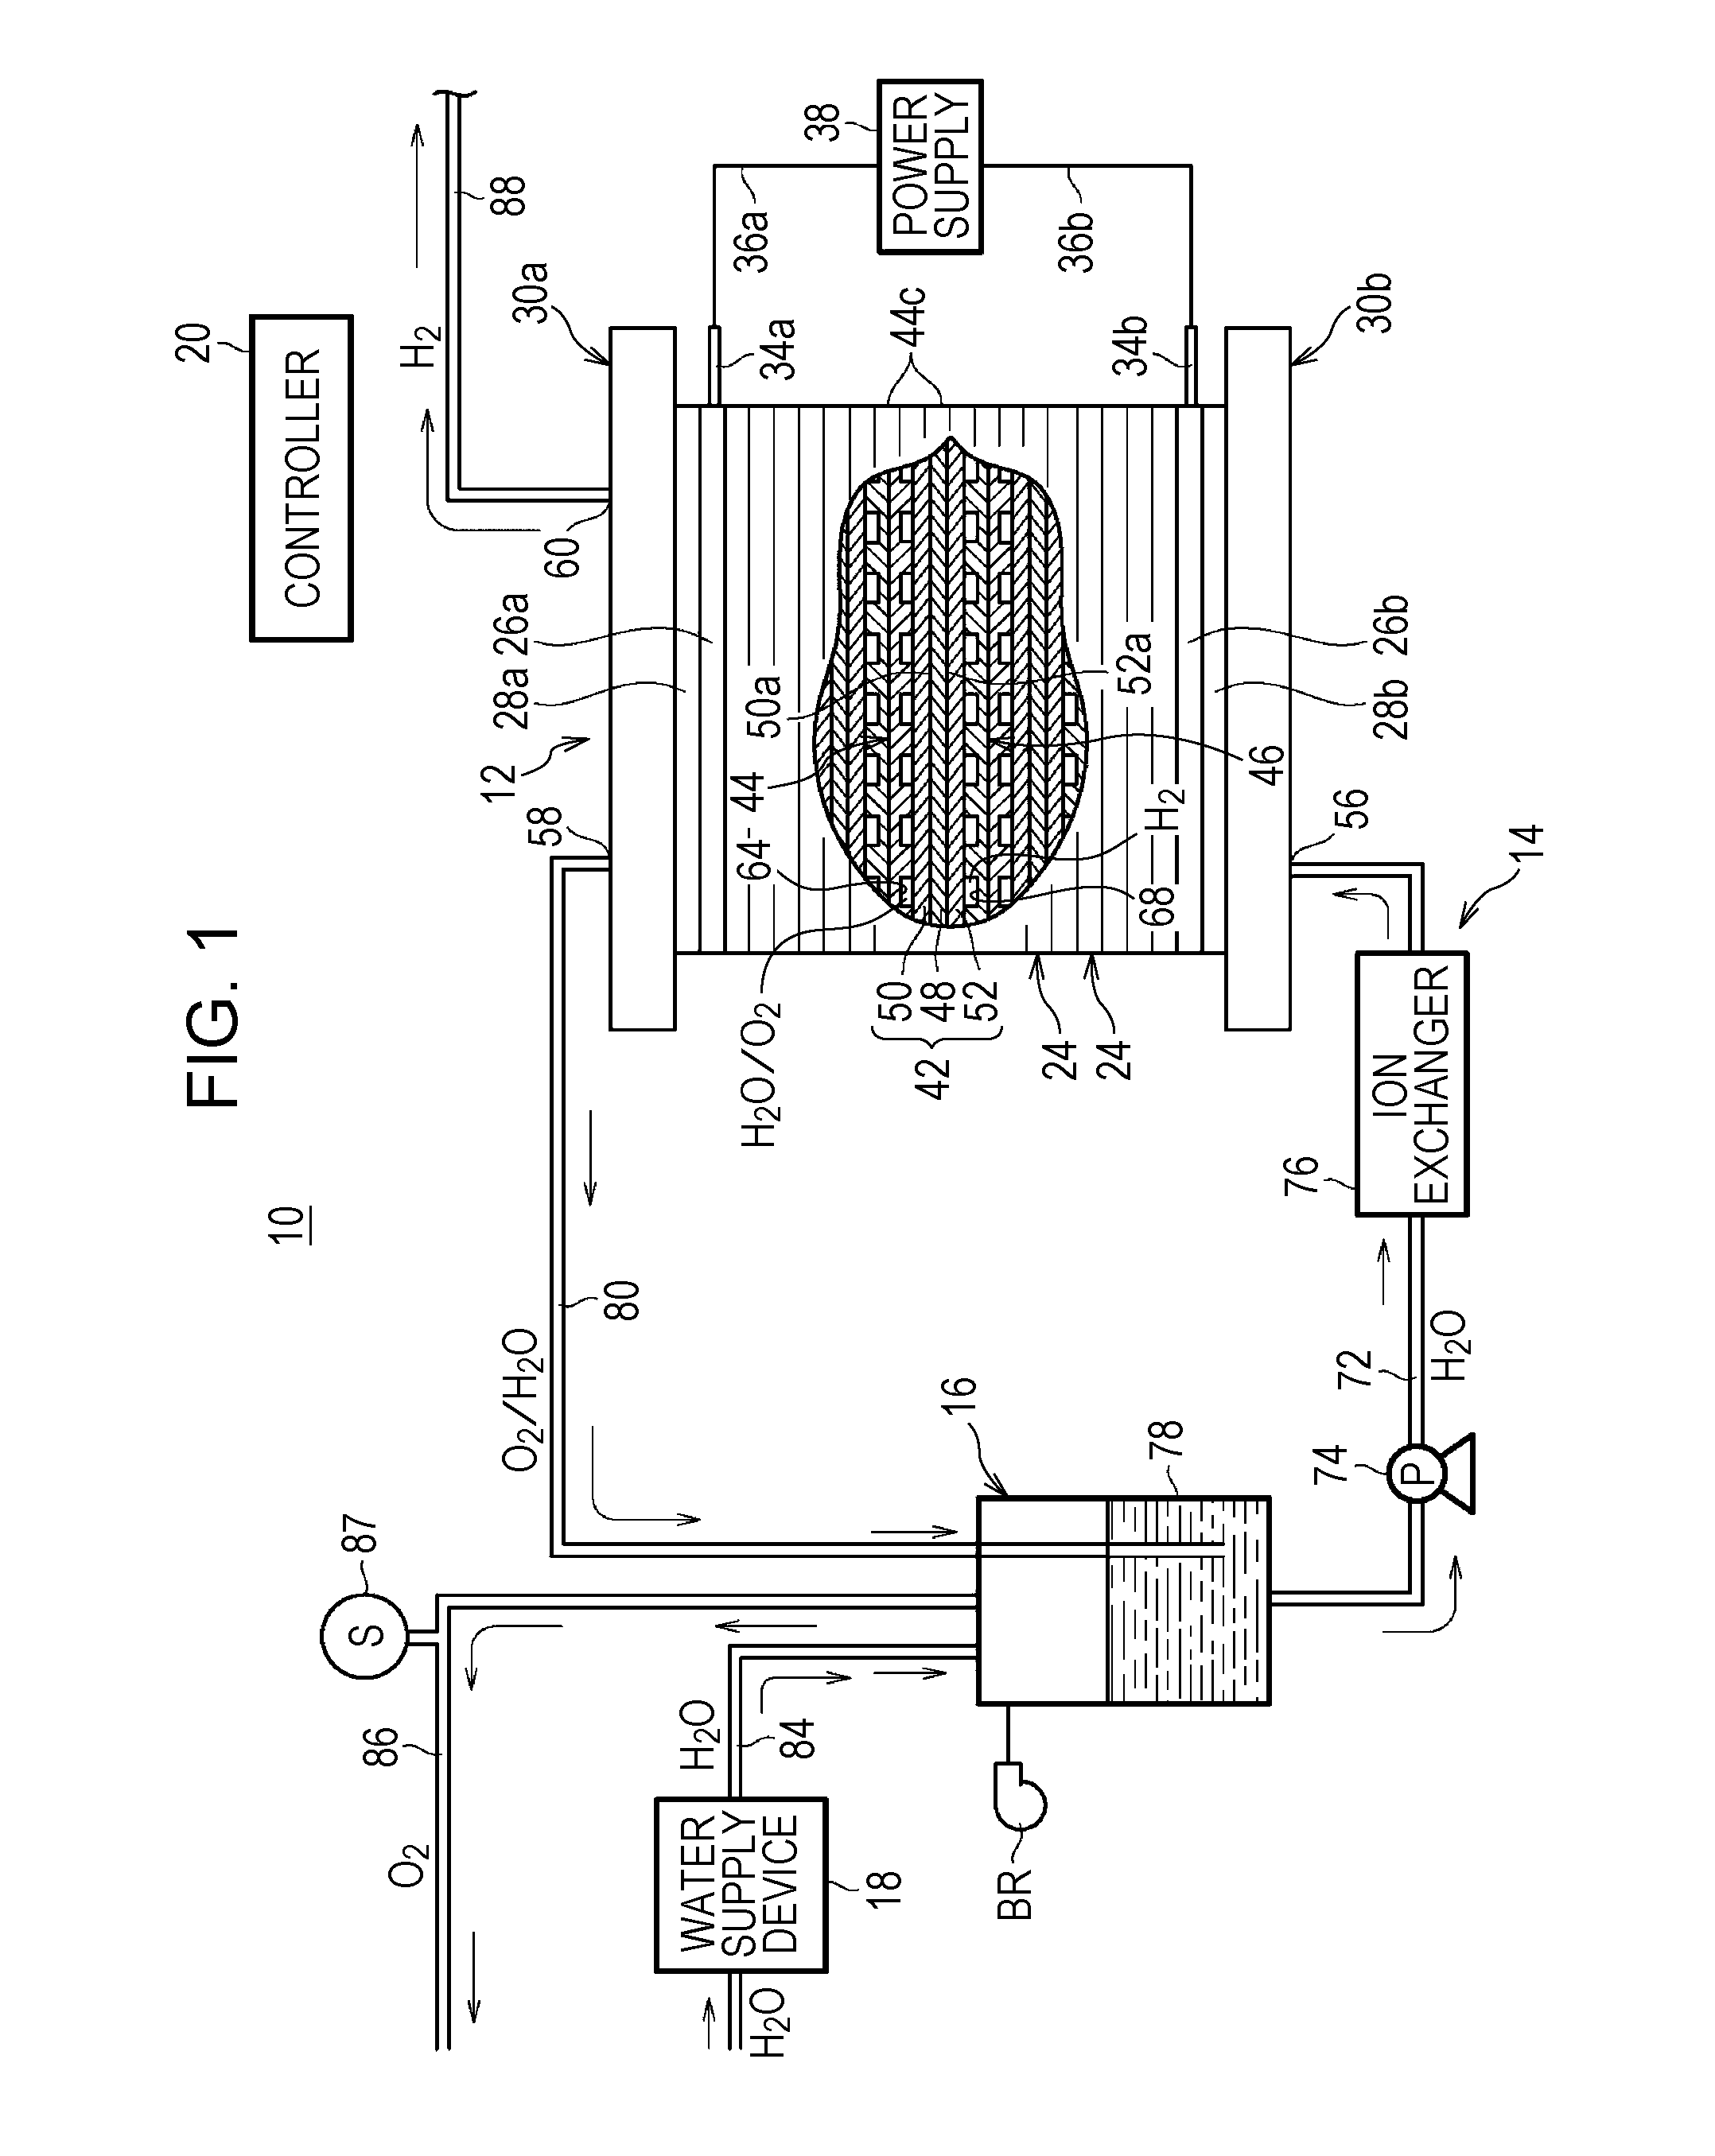 Method for operating water electrolysis system